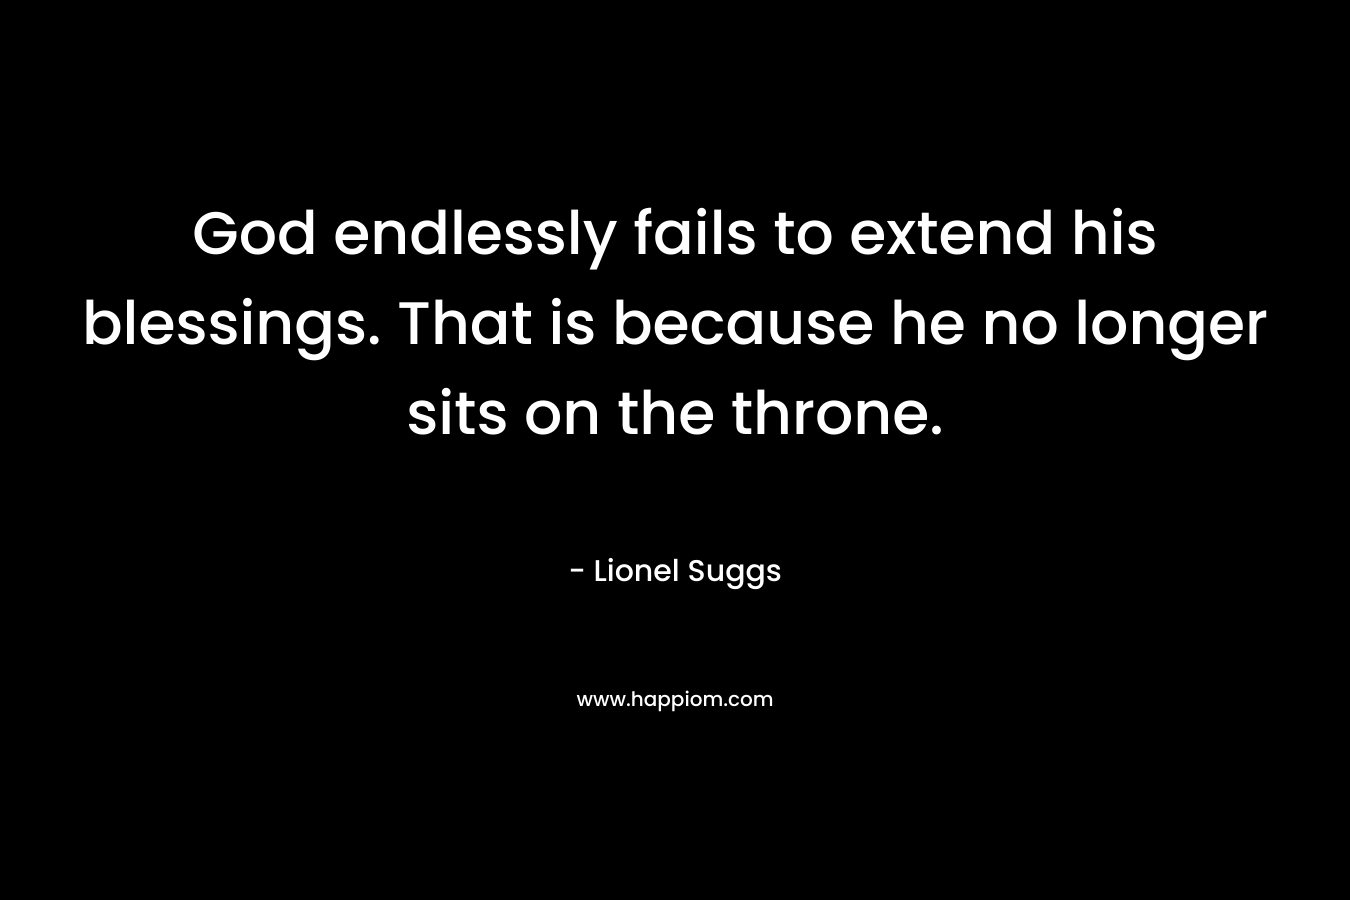 God endlessly fails to extend his blessings. That is because he no longer sits on the throne. – Lionel Suggs